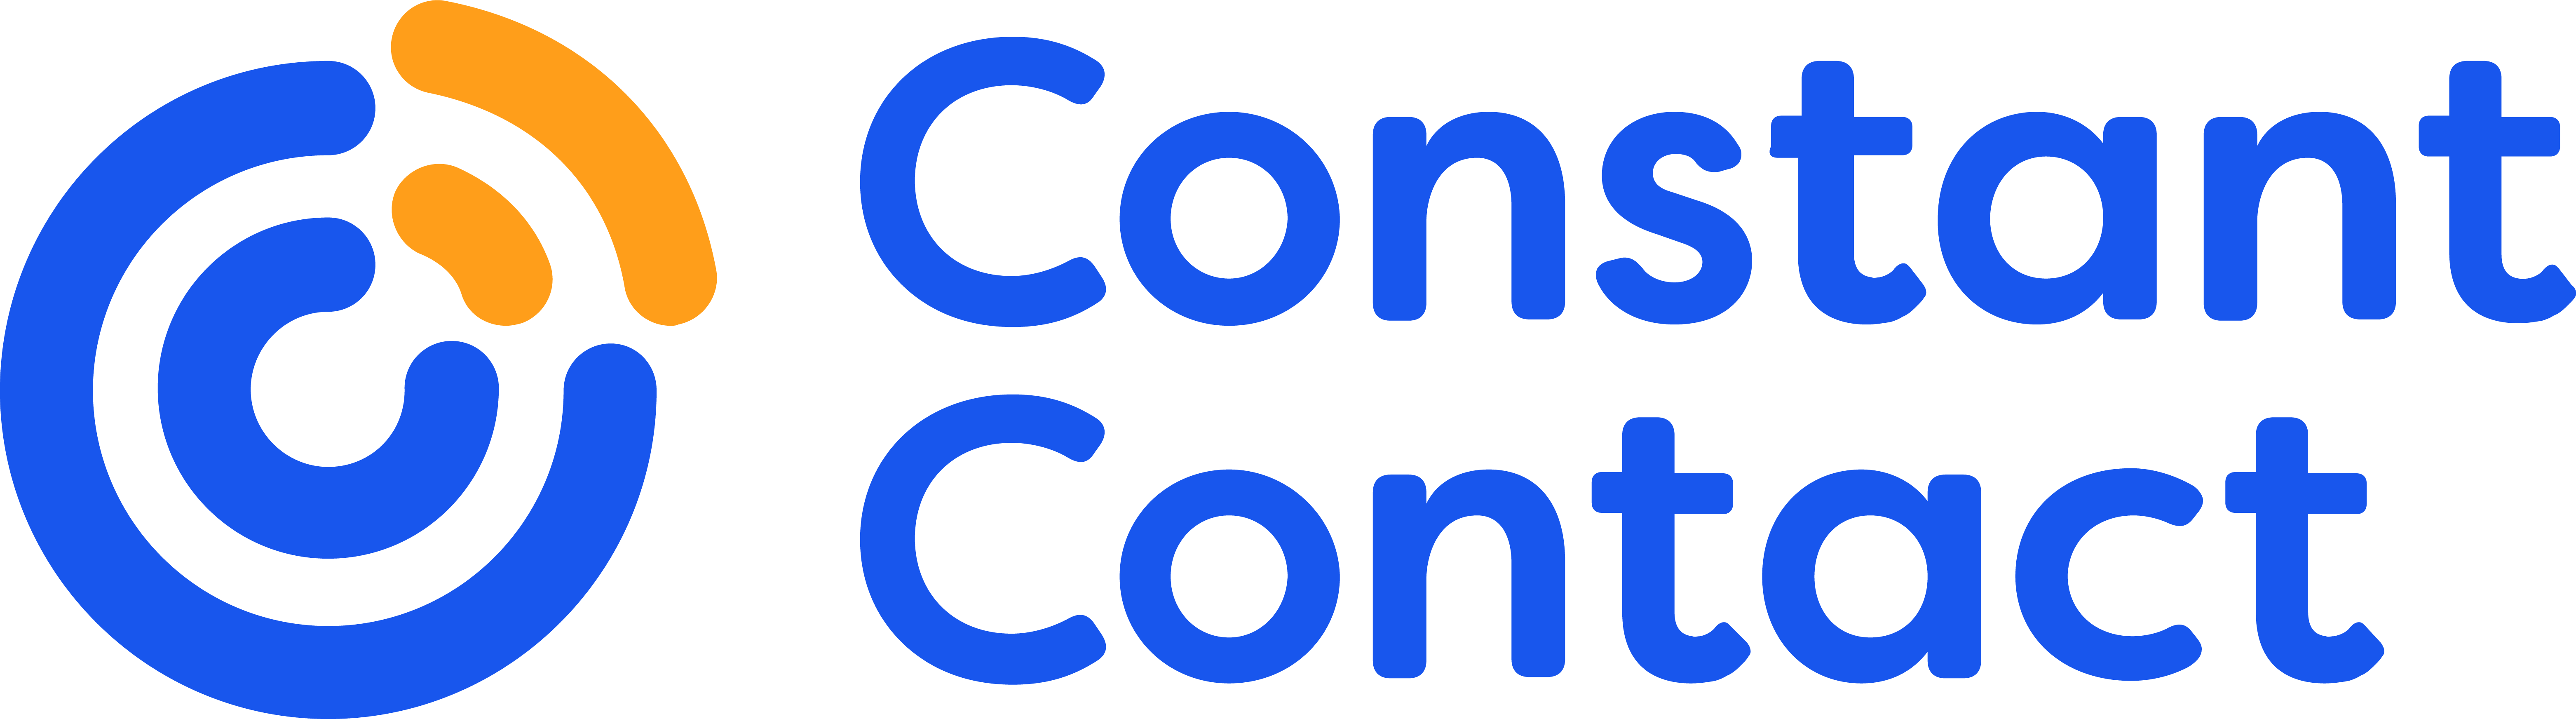 Constant Contact, Inc. is an online marketing company, headquartered in Waltham, Massachusetts, with additional offices in Loveland, Colorado; and New York, New York. The company was founded in 1995 by Randy Parker and was later sold to Endurance International in 2015.